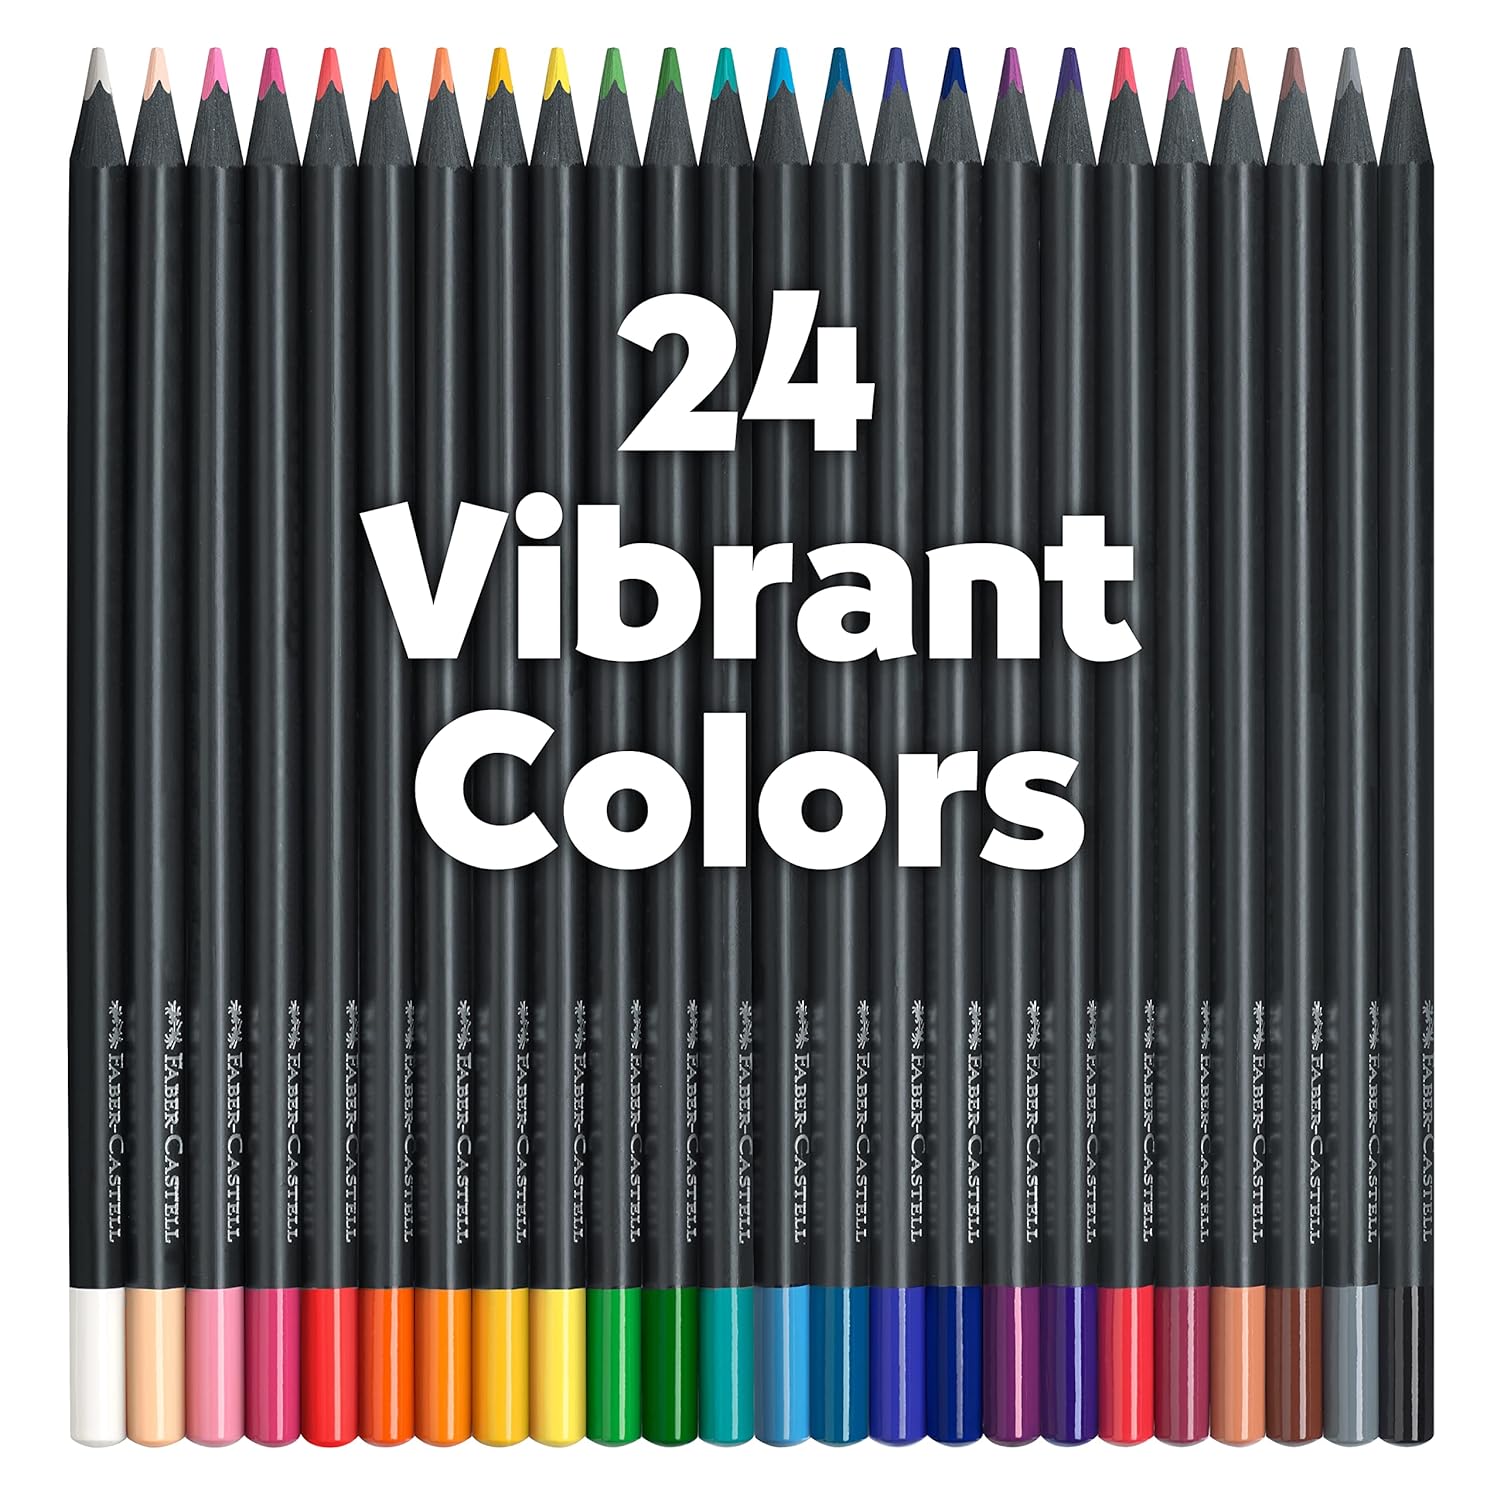 Faber-Castell Black Edition Colored Pencils - 24 Count, Black Wood and Super Soft Core Lead